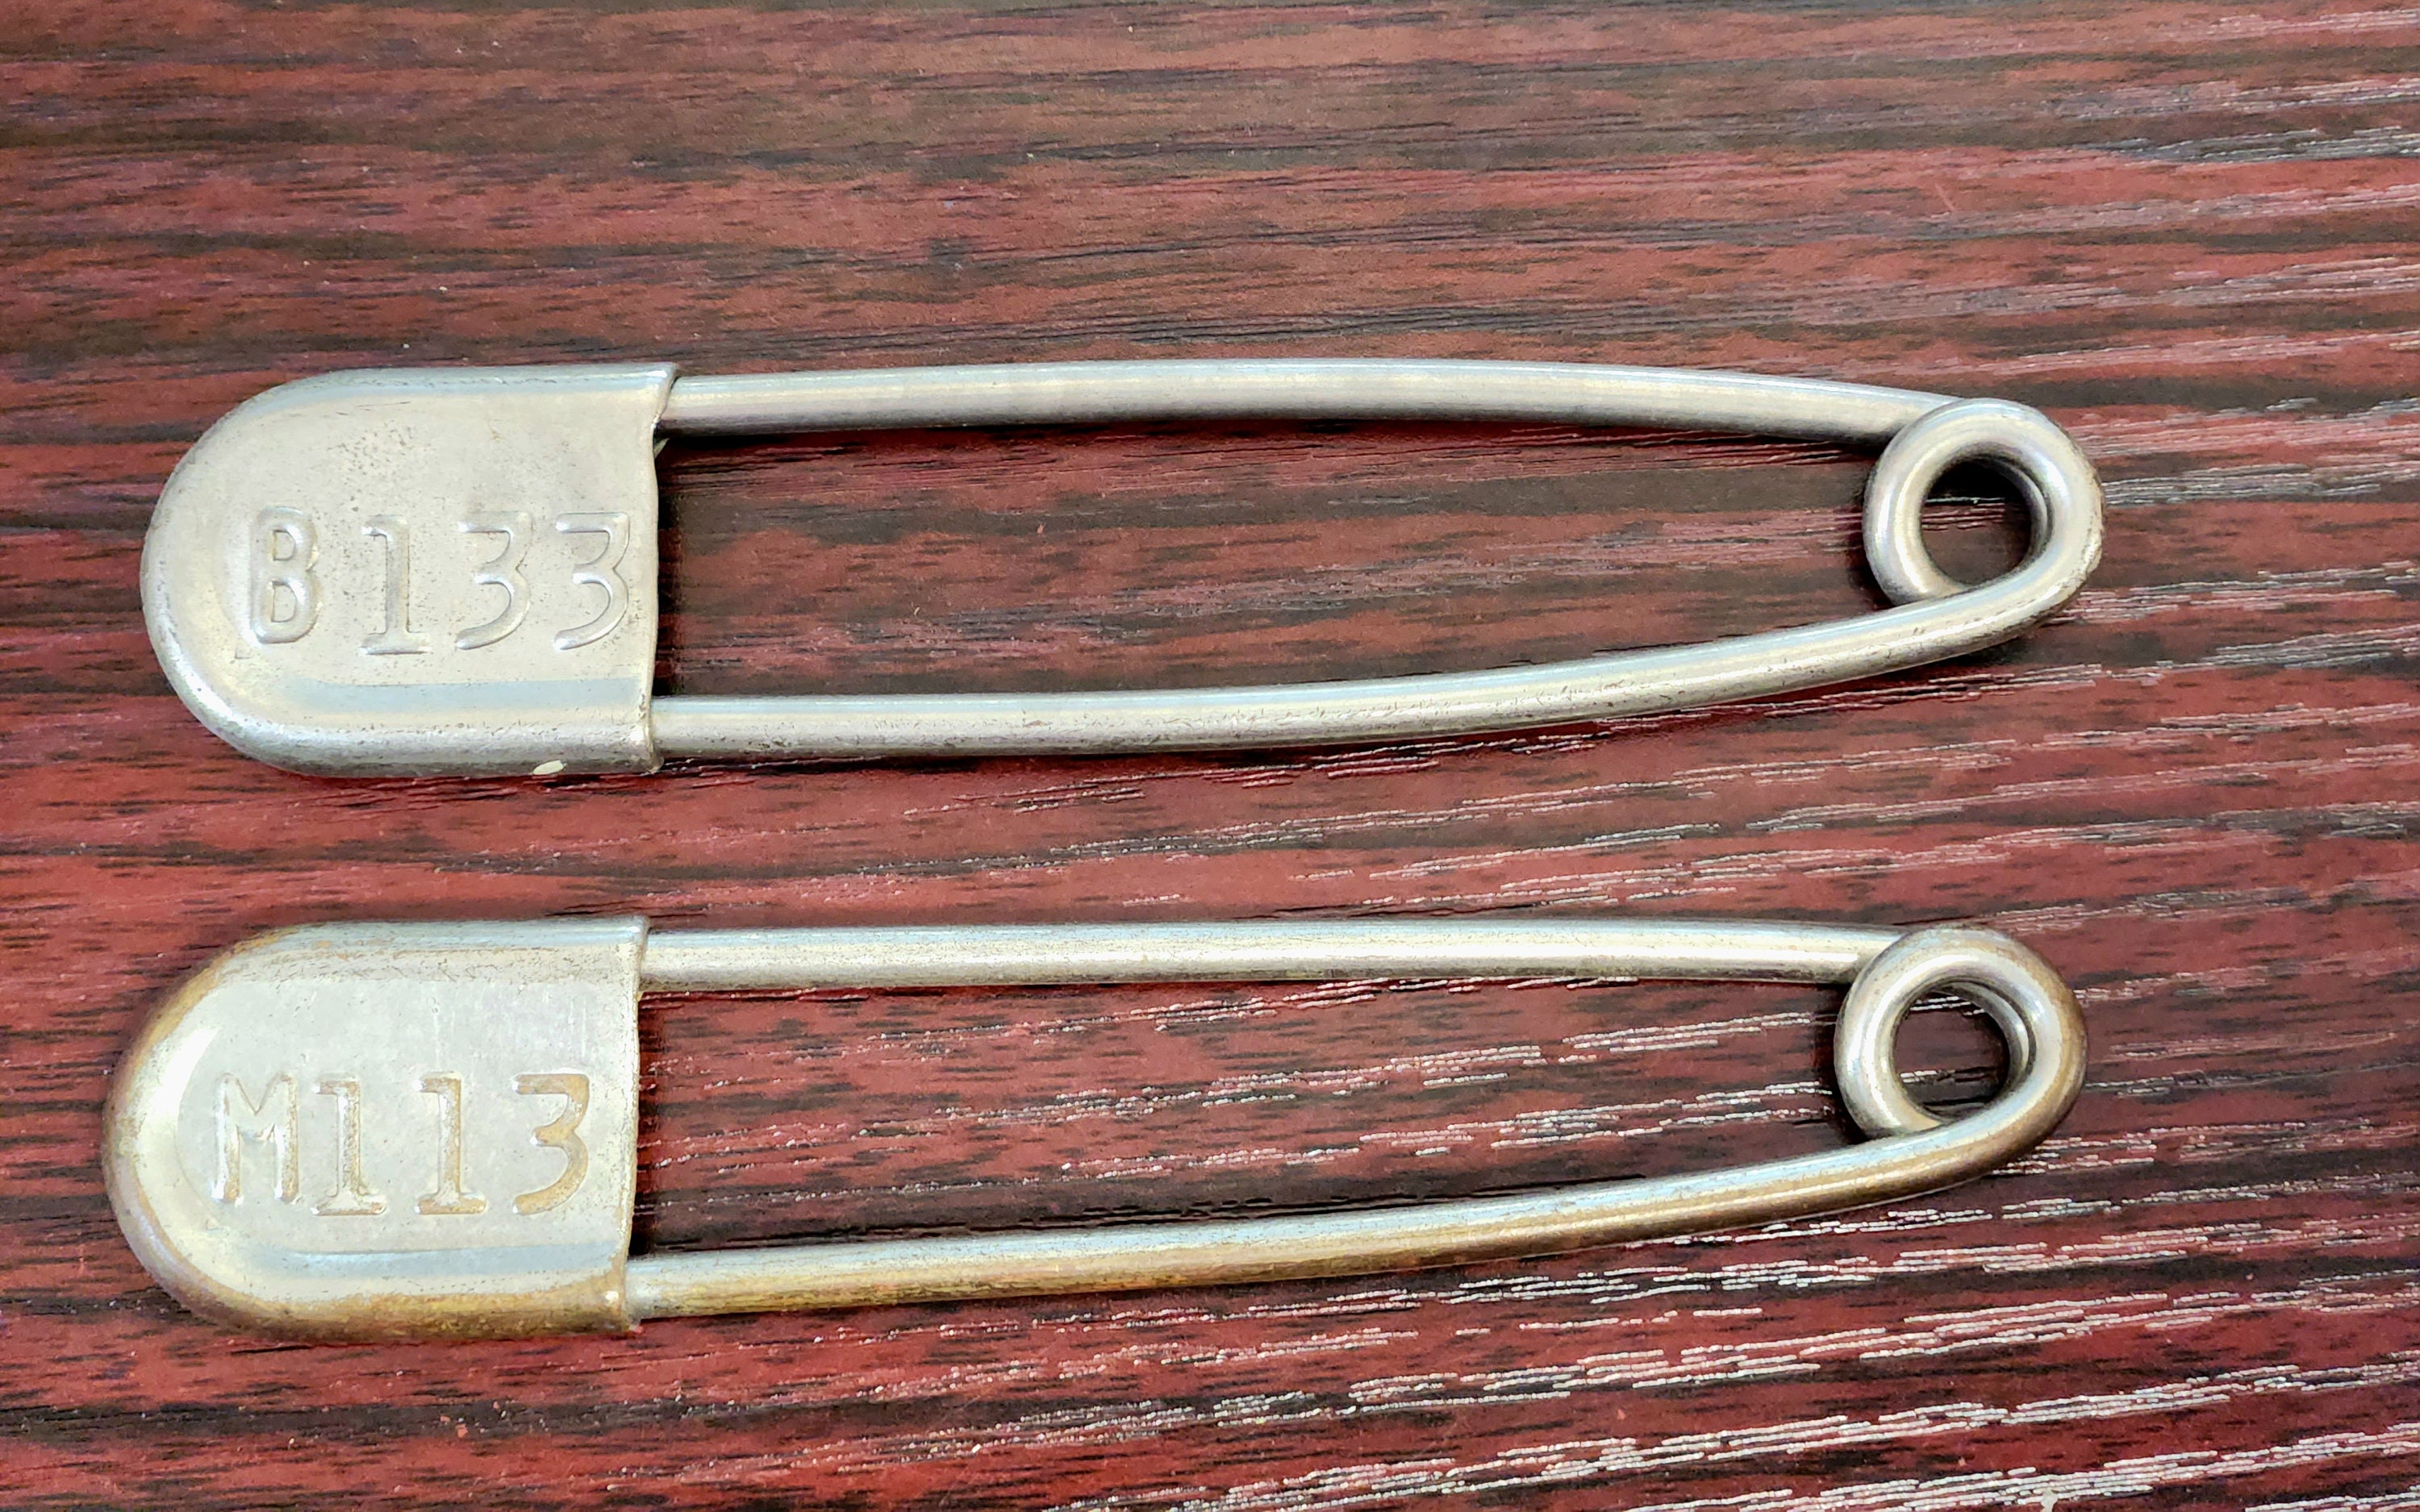 Extra Large Giant Jumbo Laundry Safety Pins 4 & 5 Inch 110mm & 128mm x2 Pins